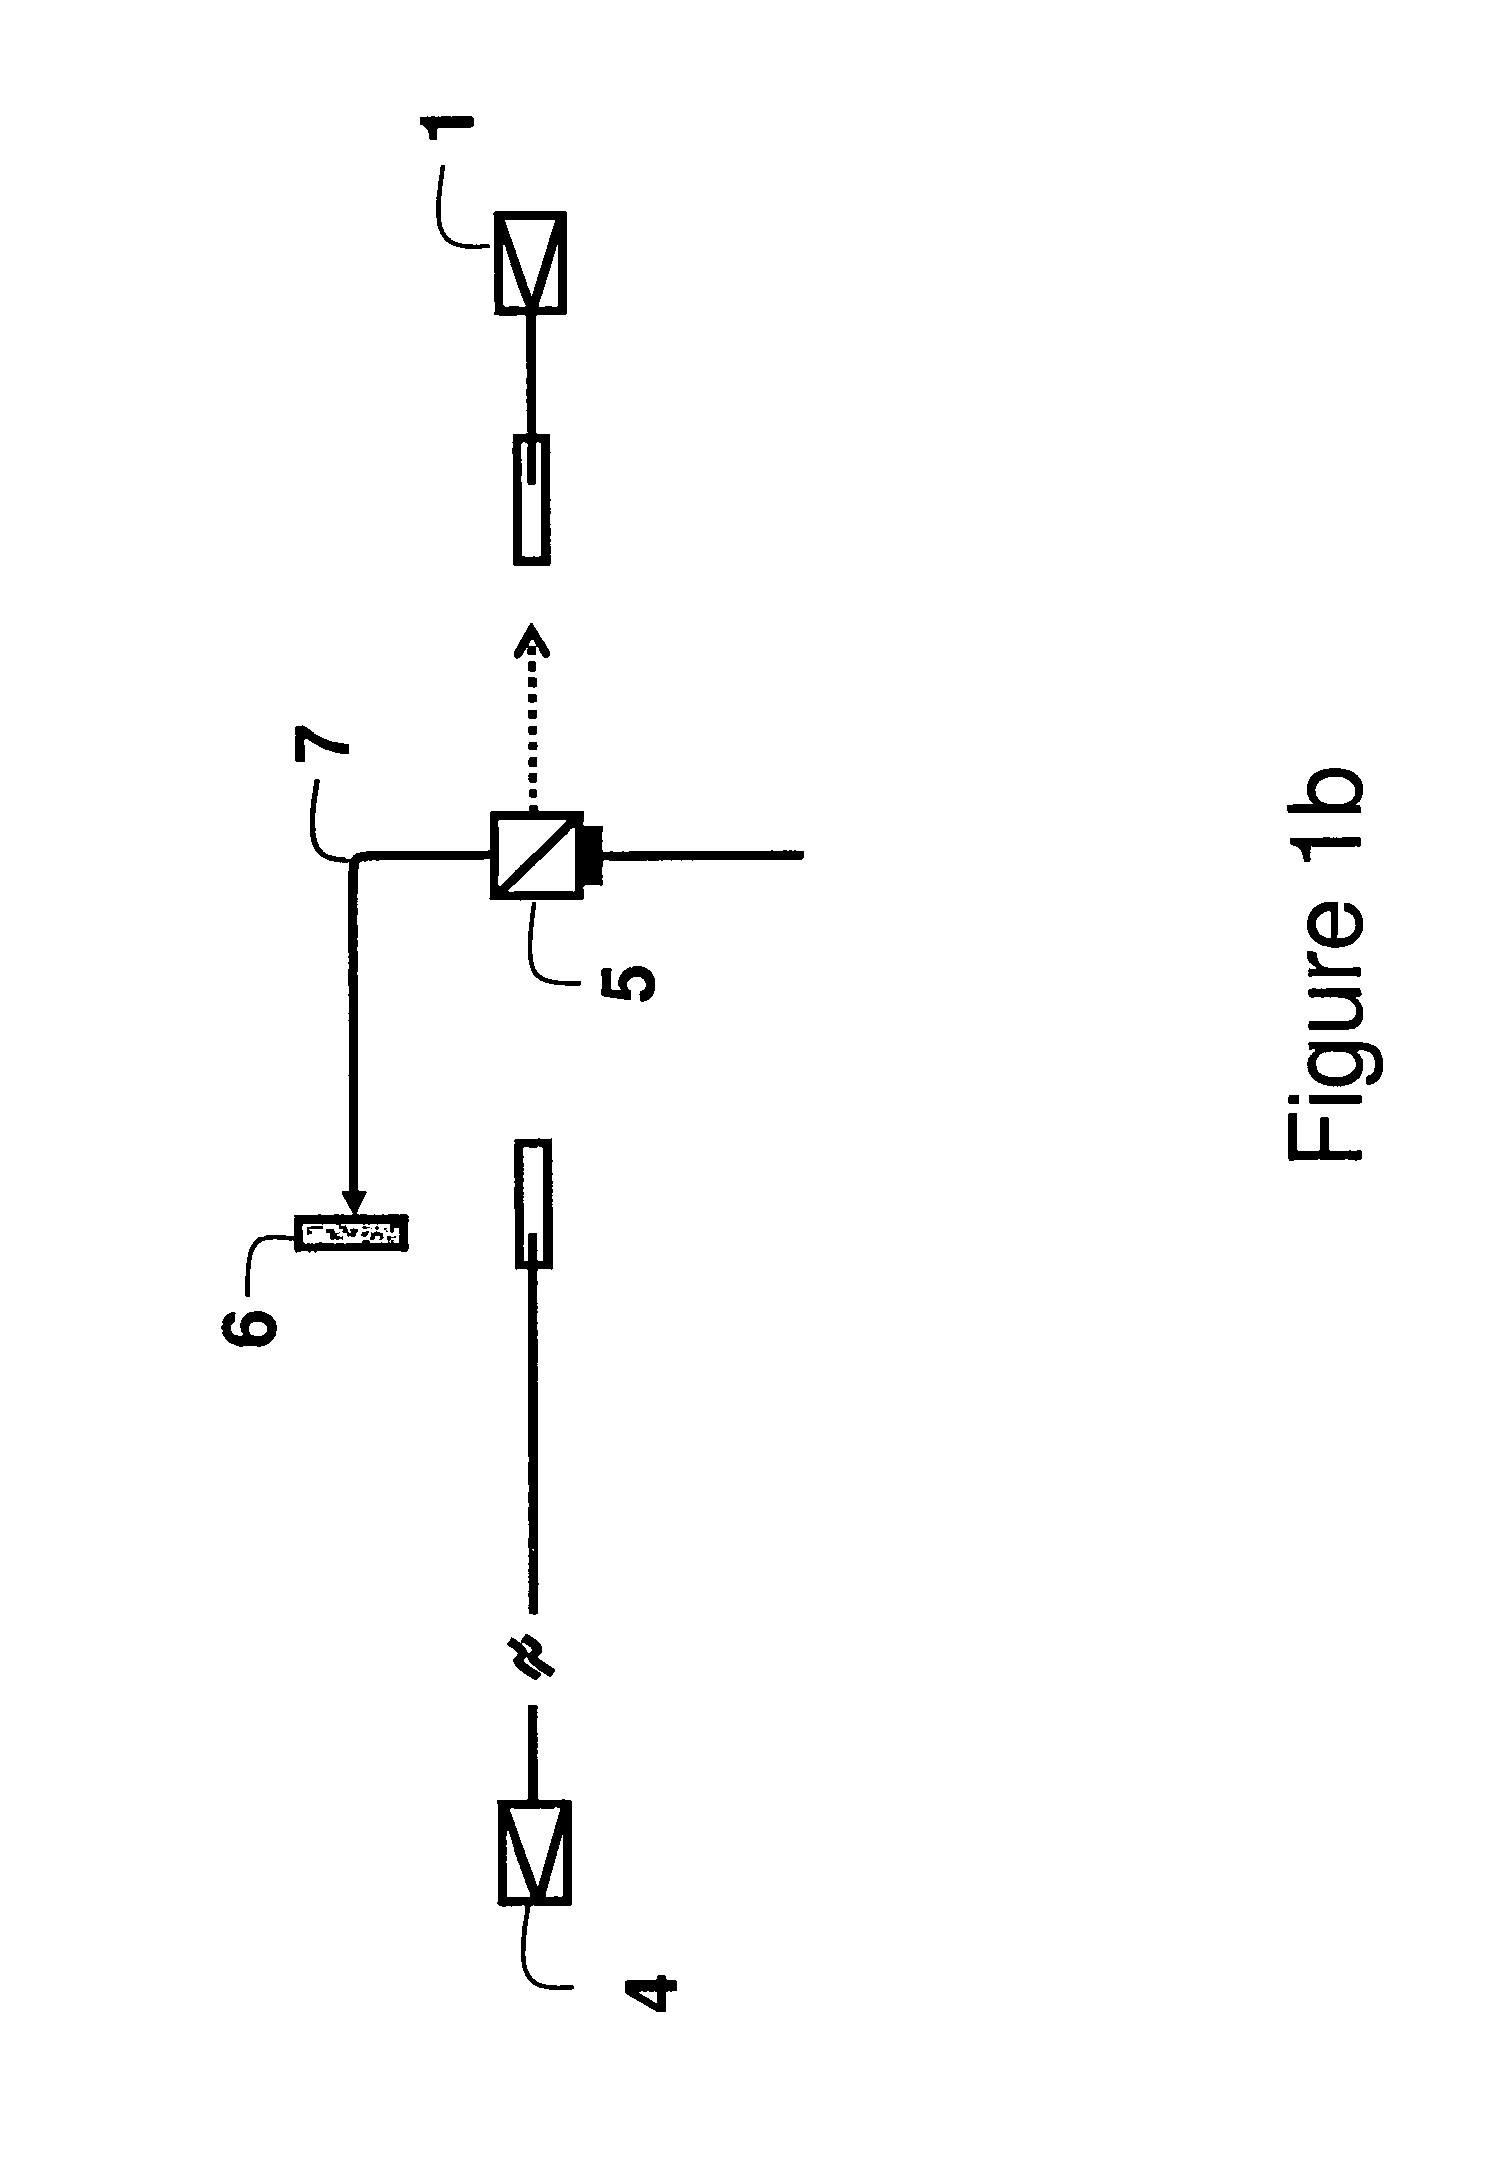 Time-resolved spectroscopy system and methods for multiple-species analysis in fluorescence and cavity-ringdown applications